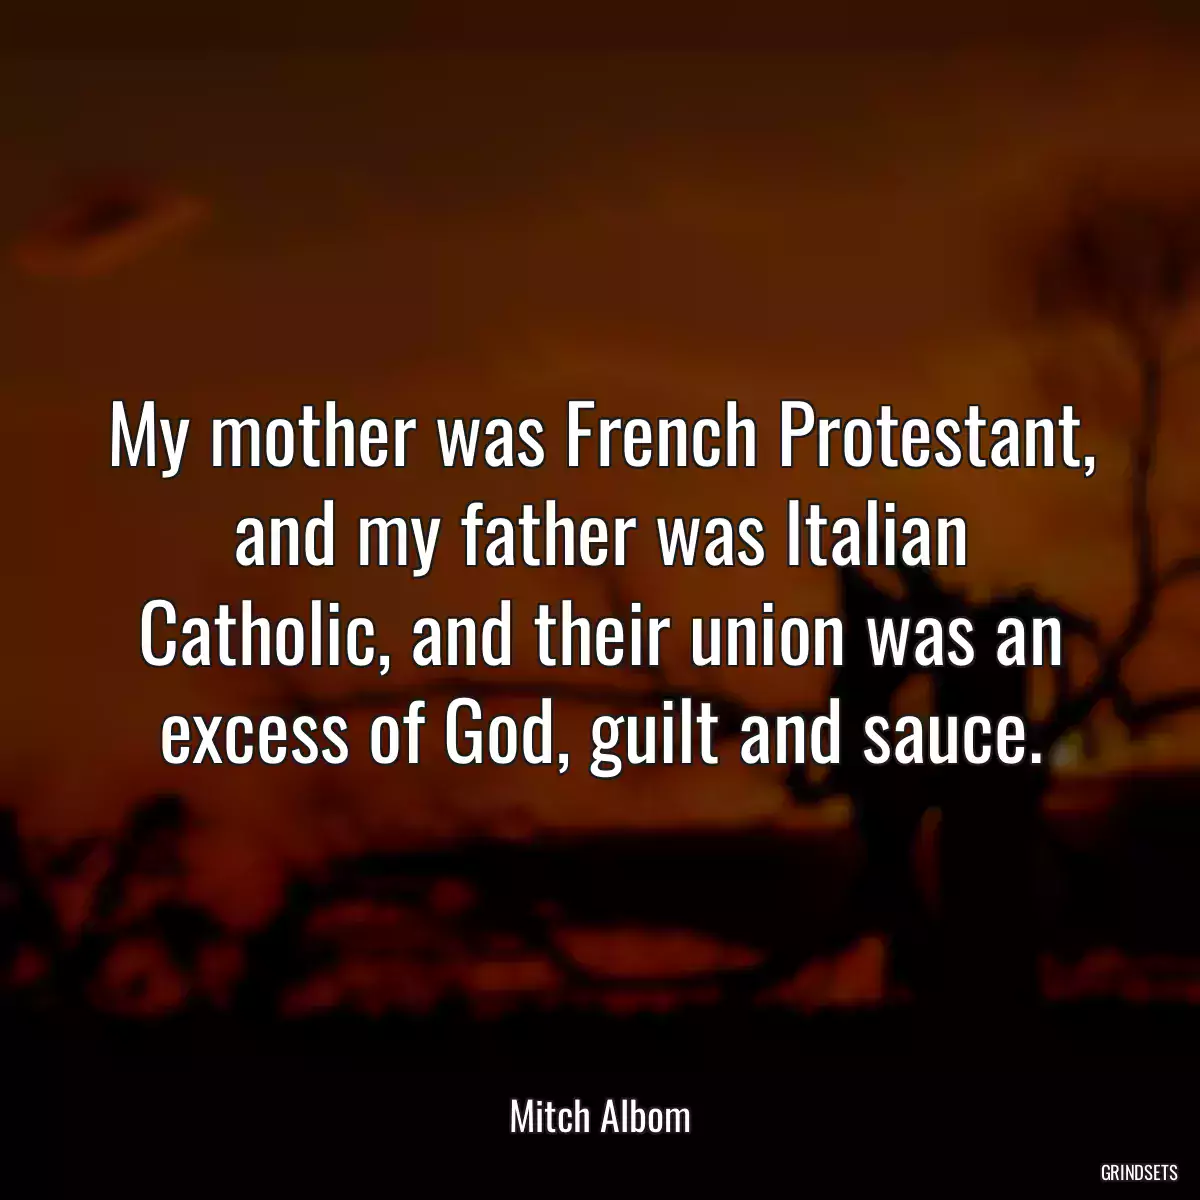 My mother was French Protestant, and my father was Italian Catholic, and their union was an excess of God, guilt and sauce.